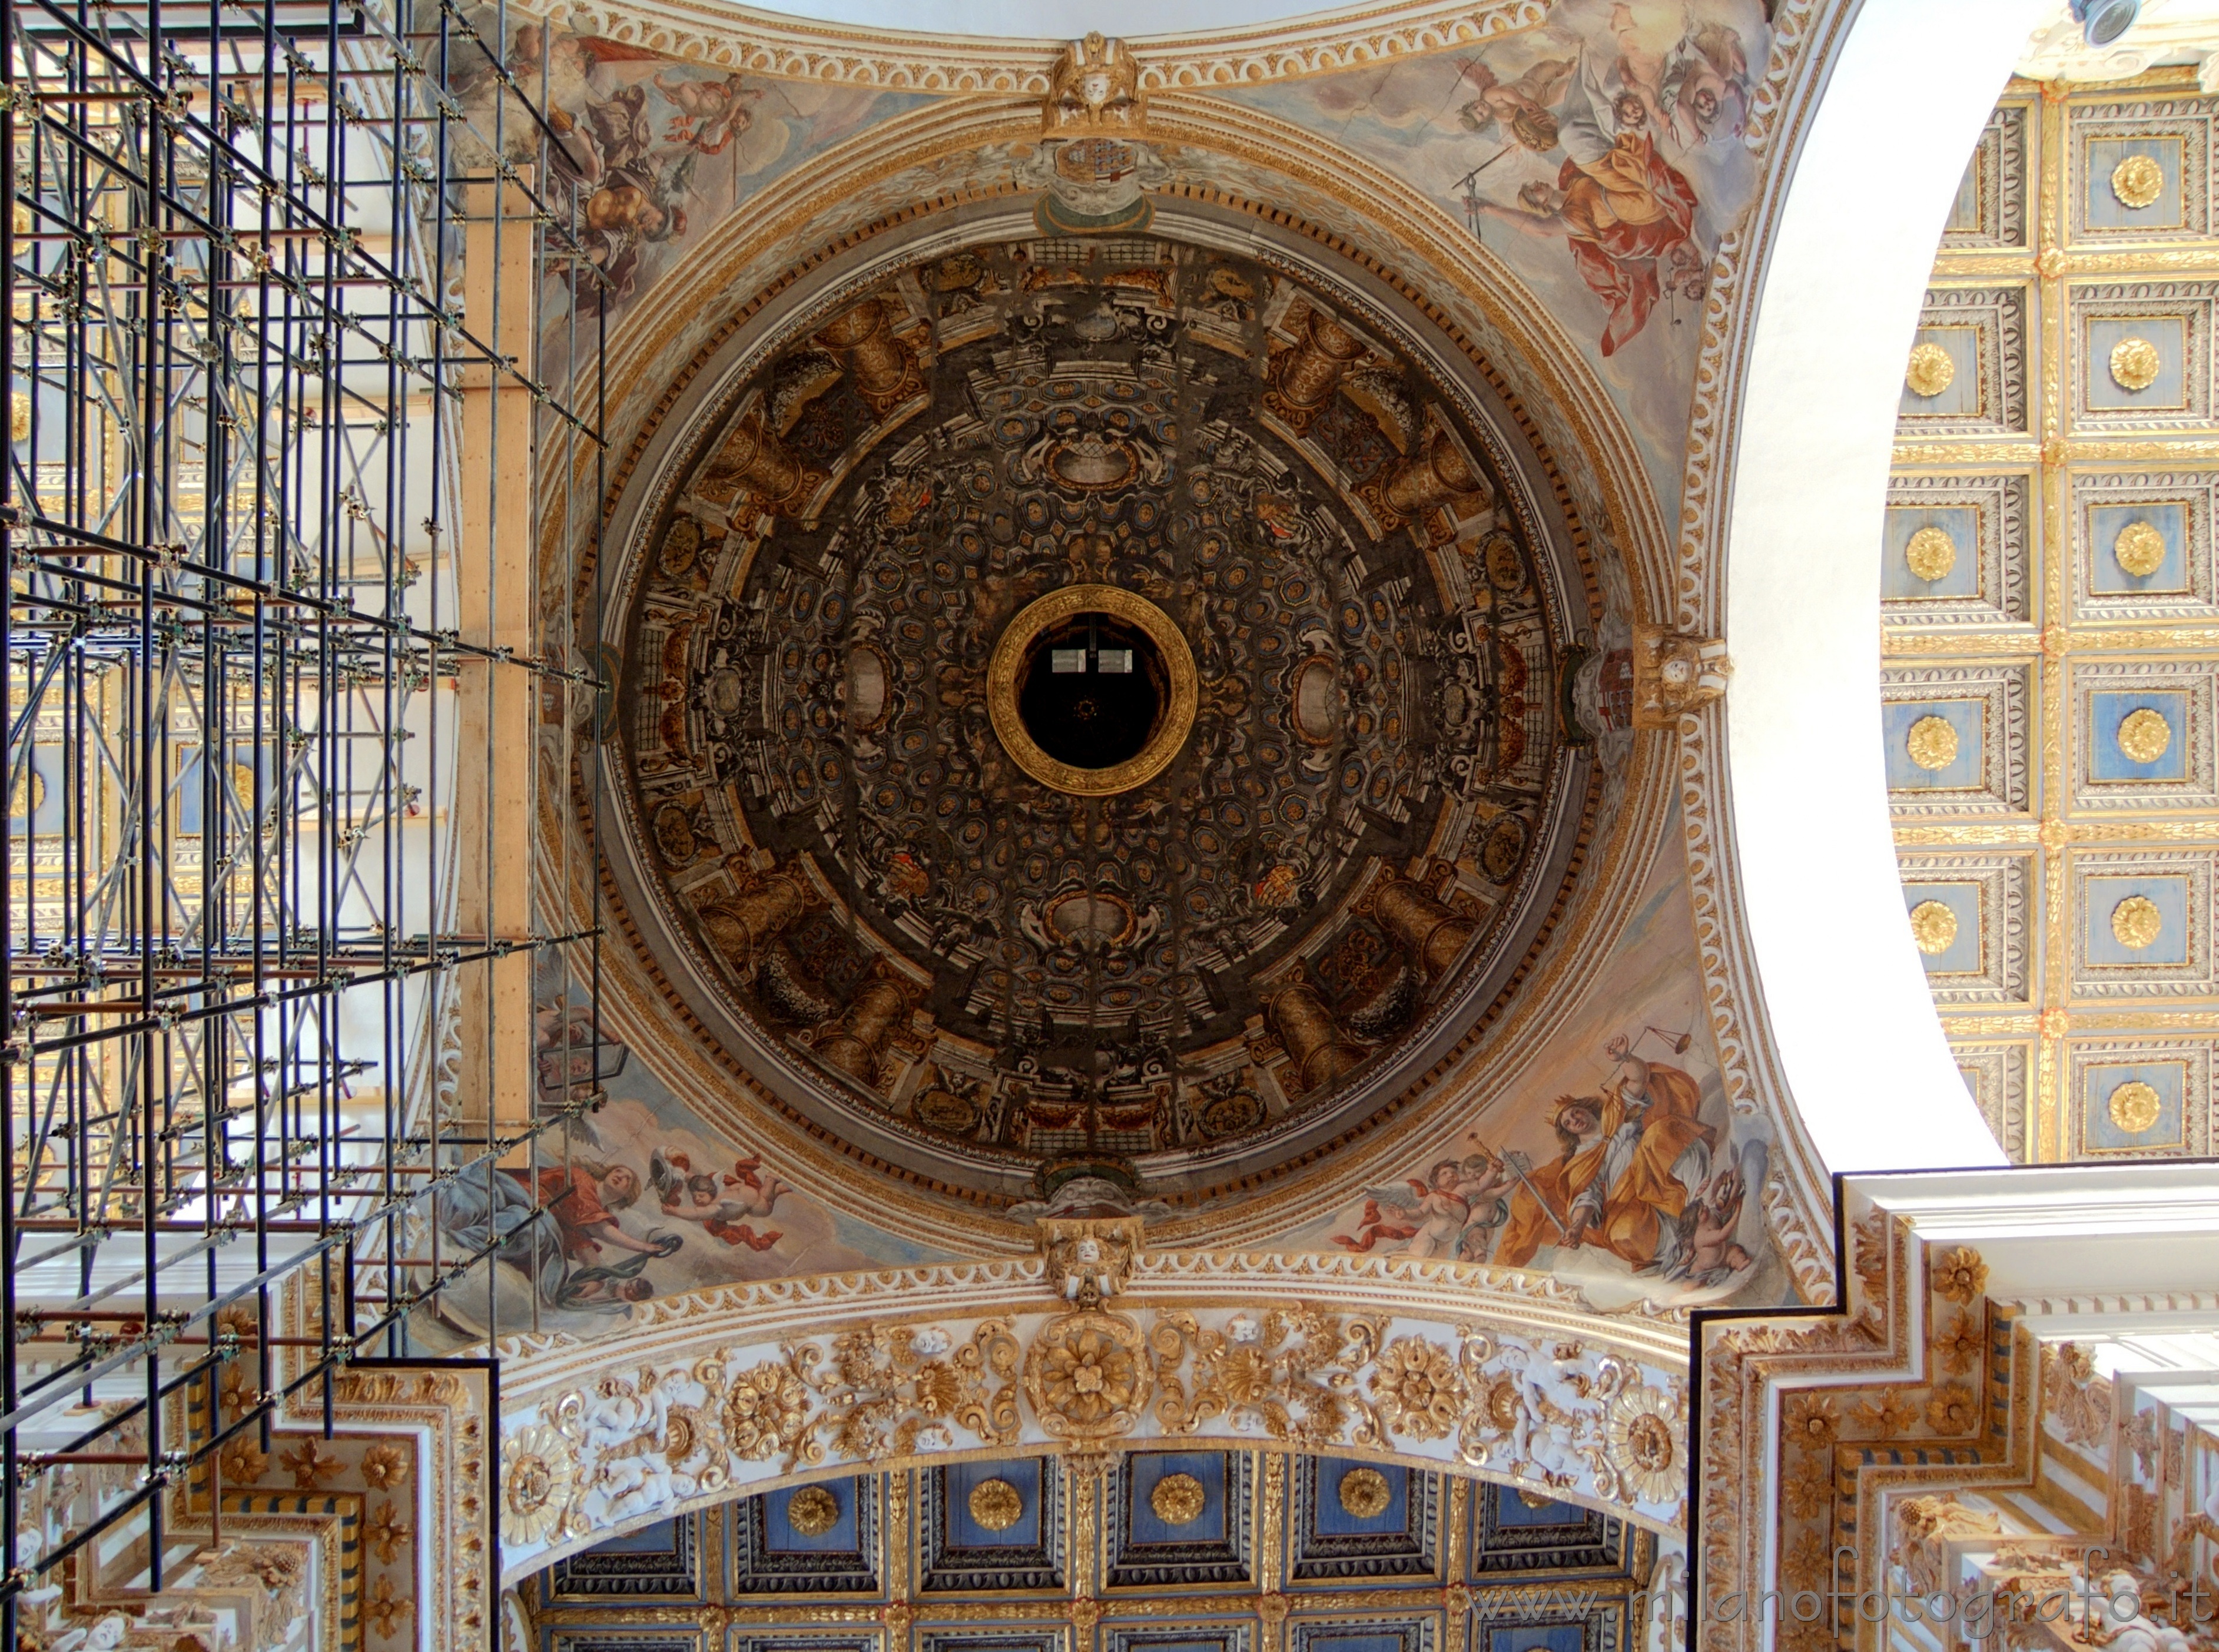 Agrigento (Italy): The ceiling of the Duomo - Agrigento (Italy)